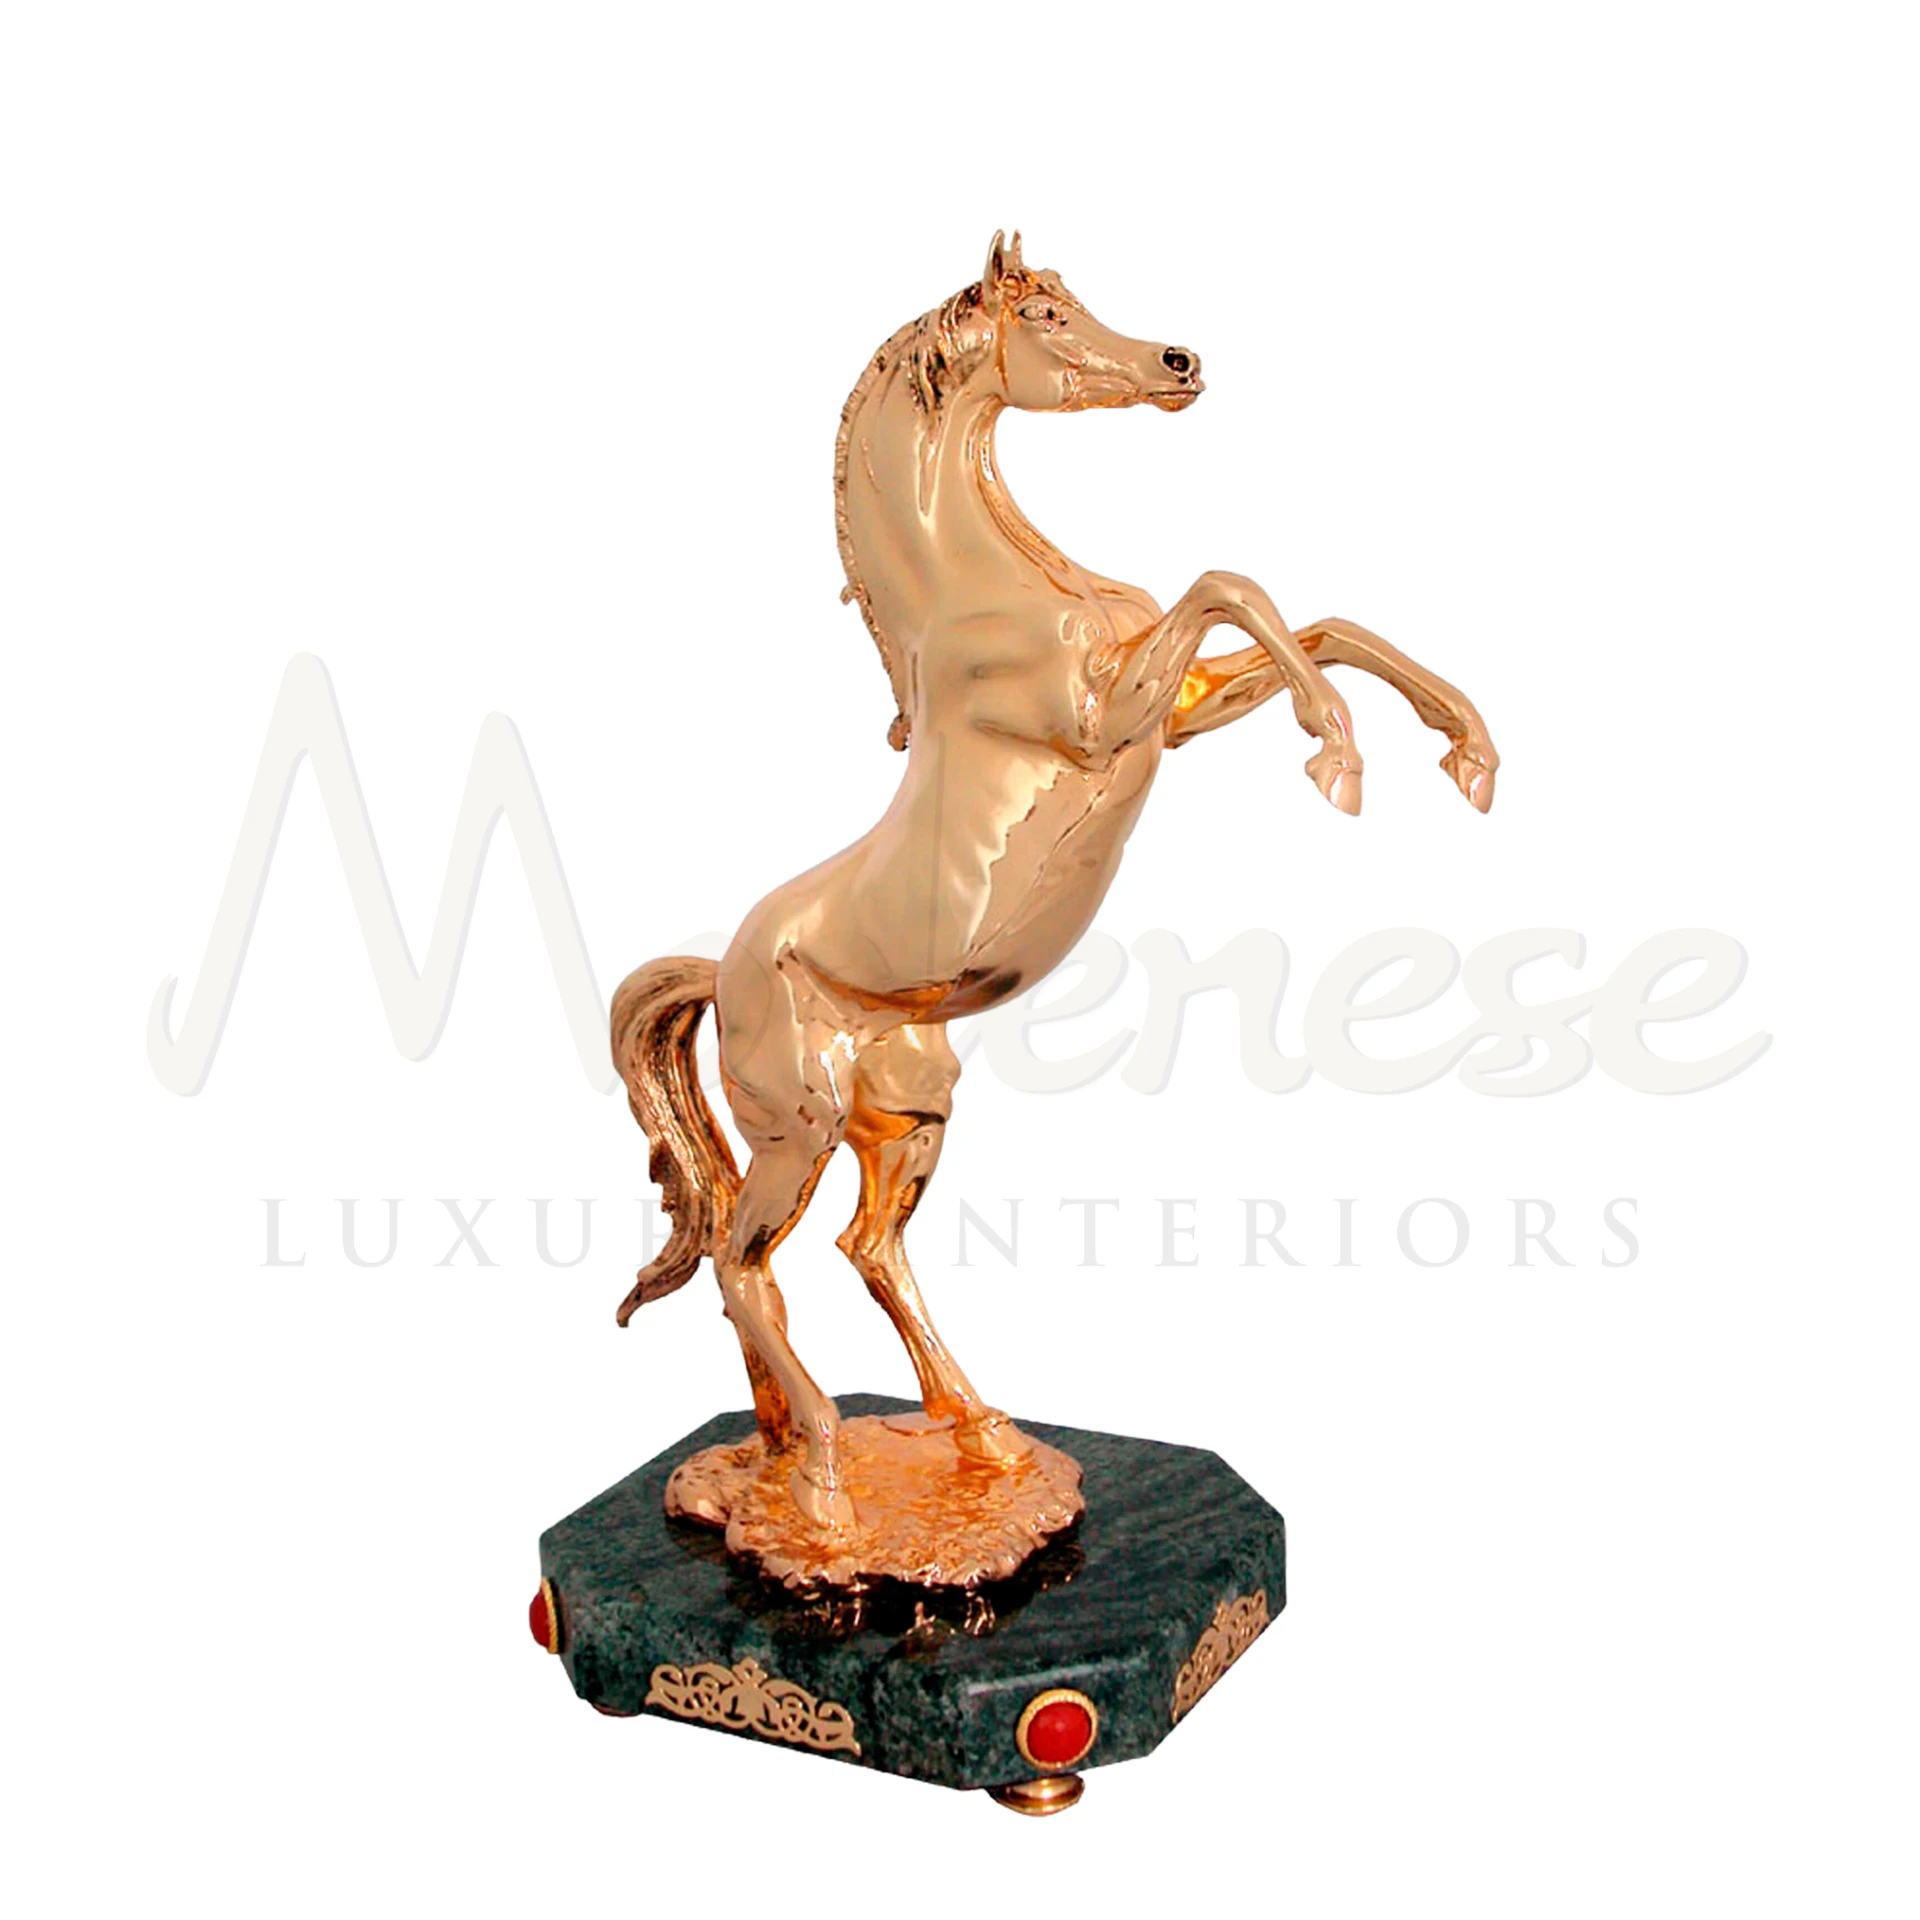 Classic Italian Design Rearing Horse, a statement of luxury and strength, adorned with gold or silver leaf, ideal for sophisticated home décor and art enthusiasts.